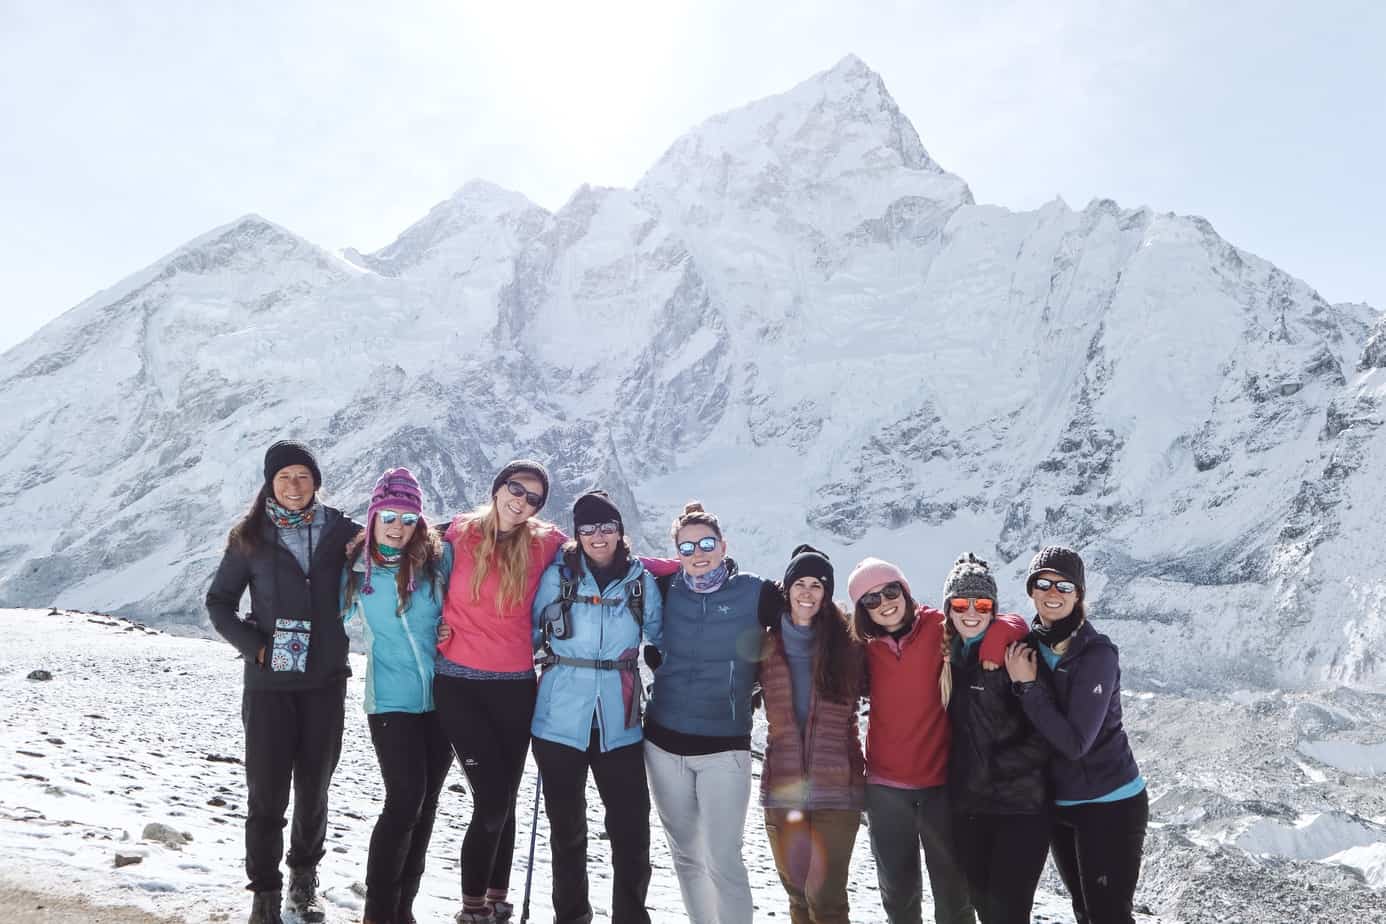 Read this sample 11 day Everest Base Camp trek itinerary for locations, distances, altitude, and how to choose the best tour company based on itinerary. #ebc #everestbasecamp #everestbasecampitinerary #everestbasecamptrekitinerary #trekking #nepal 